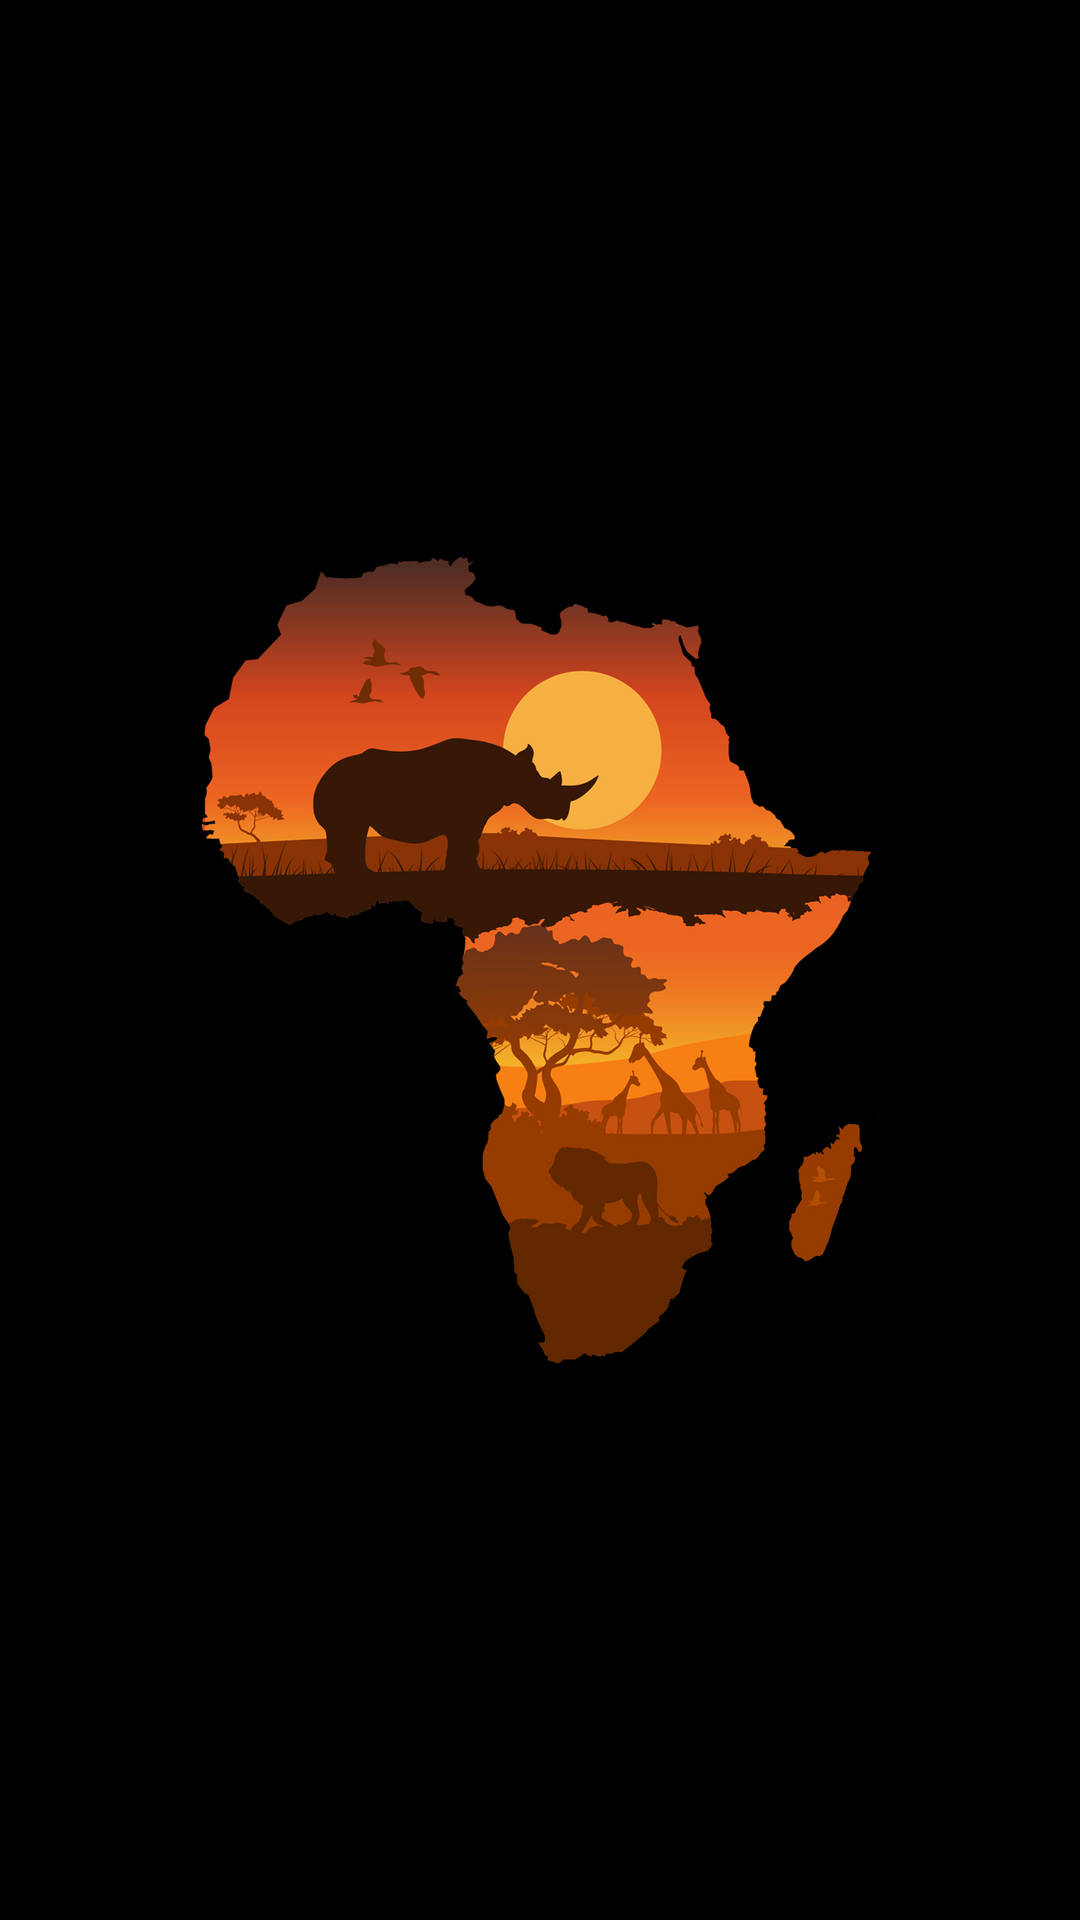 Africa Map With Animals